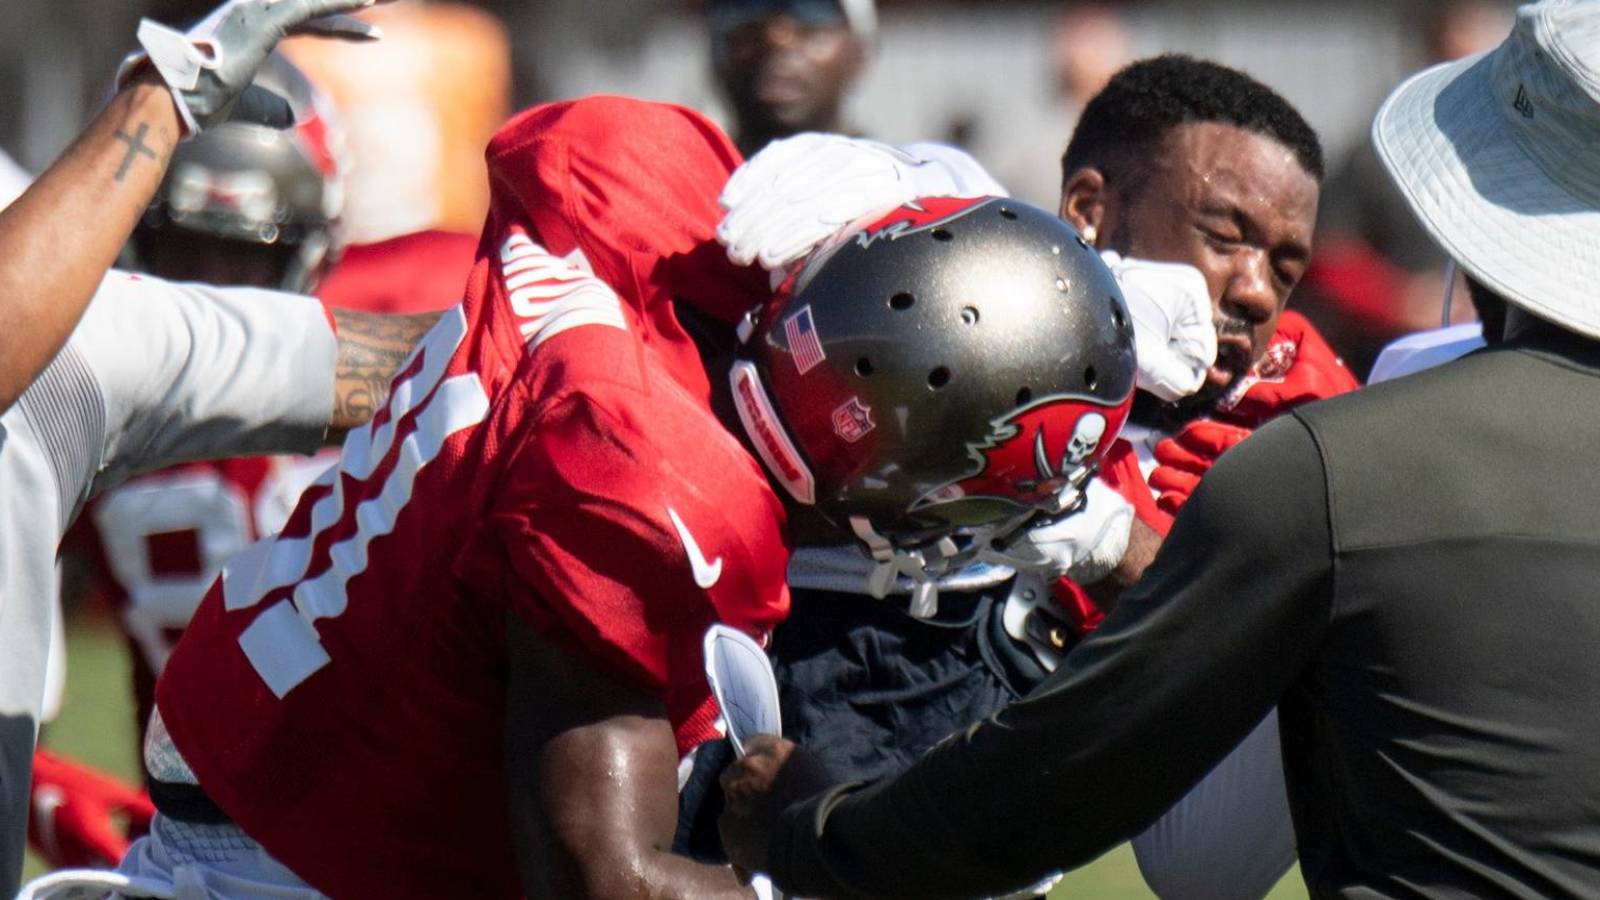 Multiple altercations break out at joint Titans-Buccaneers practice